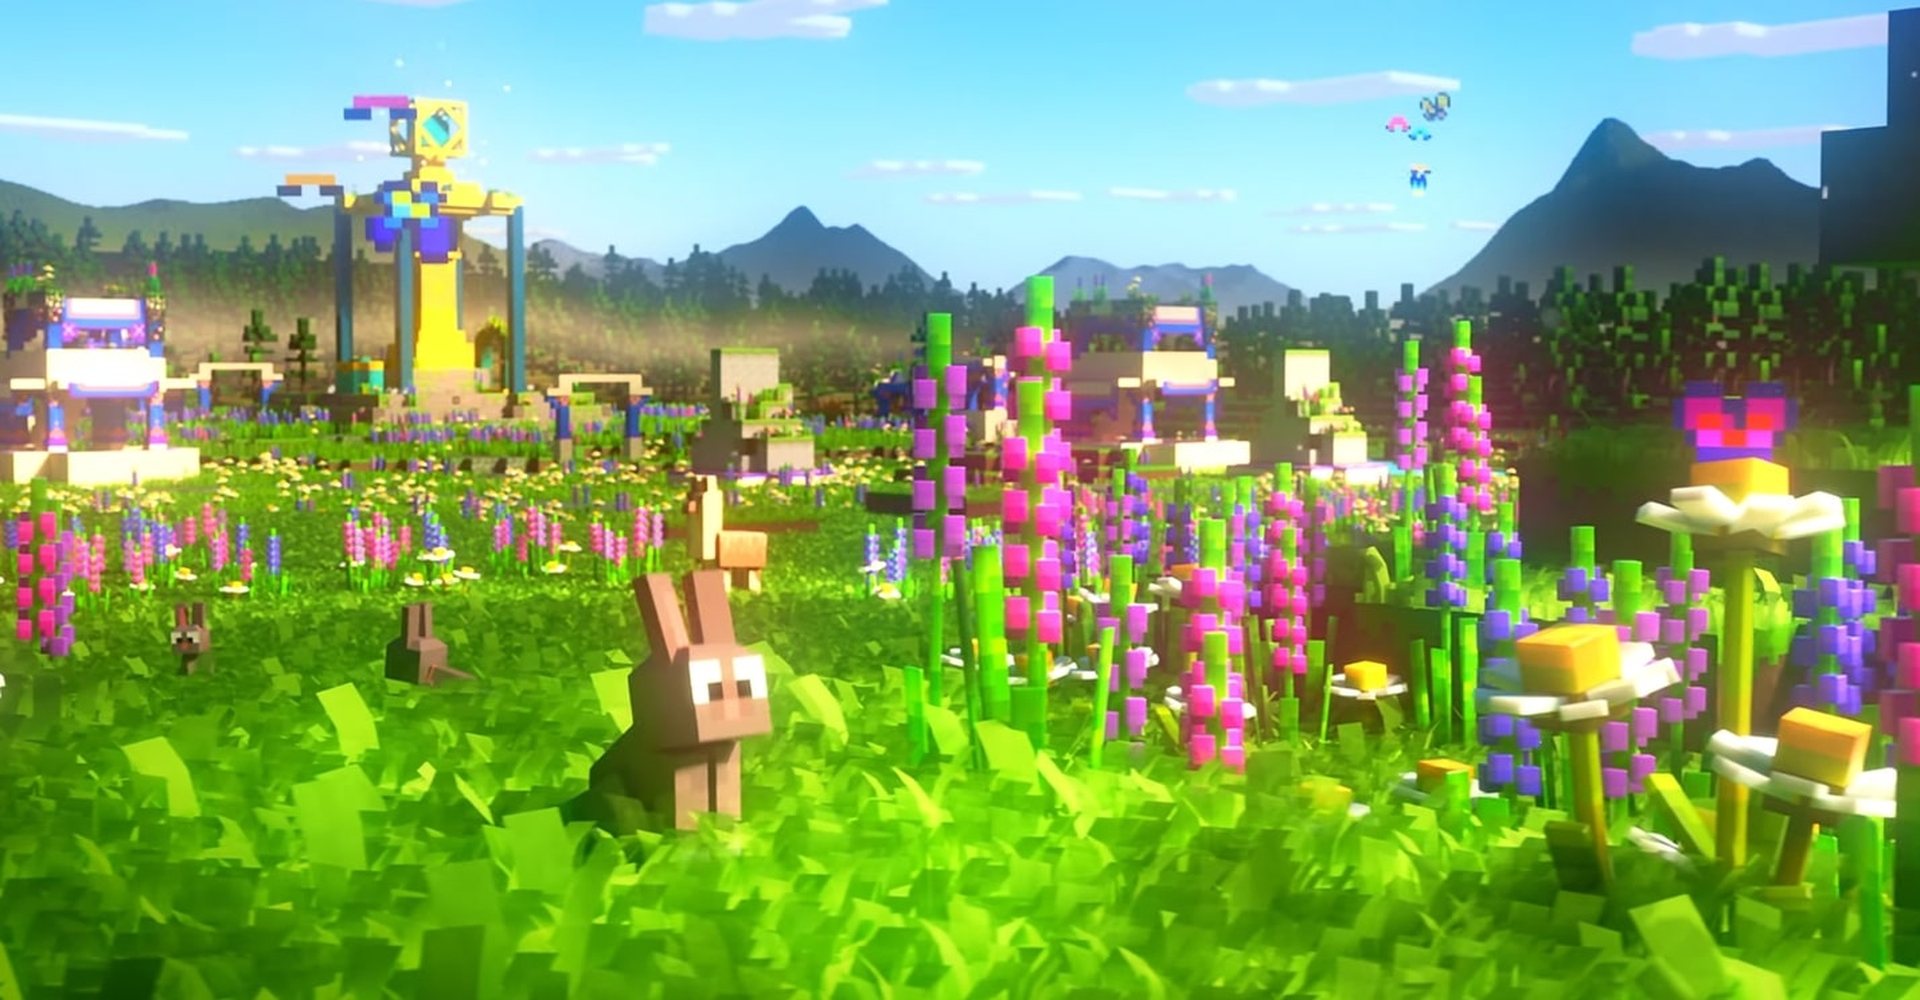 In this article, we are going to cover Minecraft Legends release date, trailer, and more, everything we know so far about the new open world RPG game.